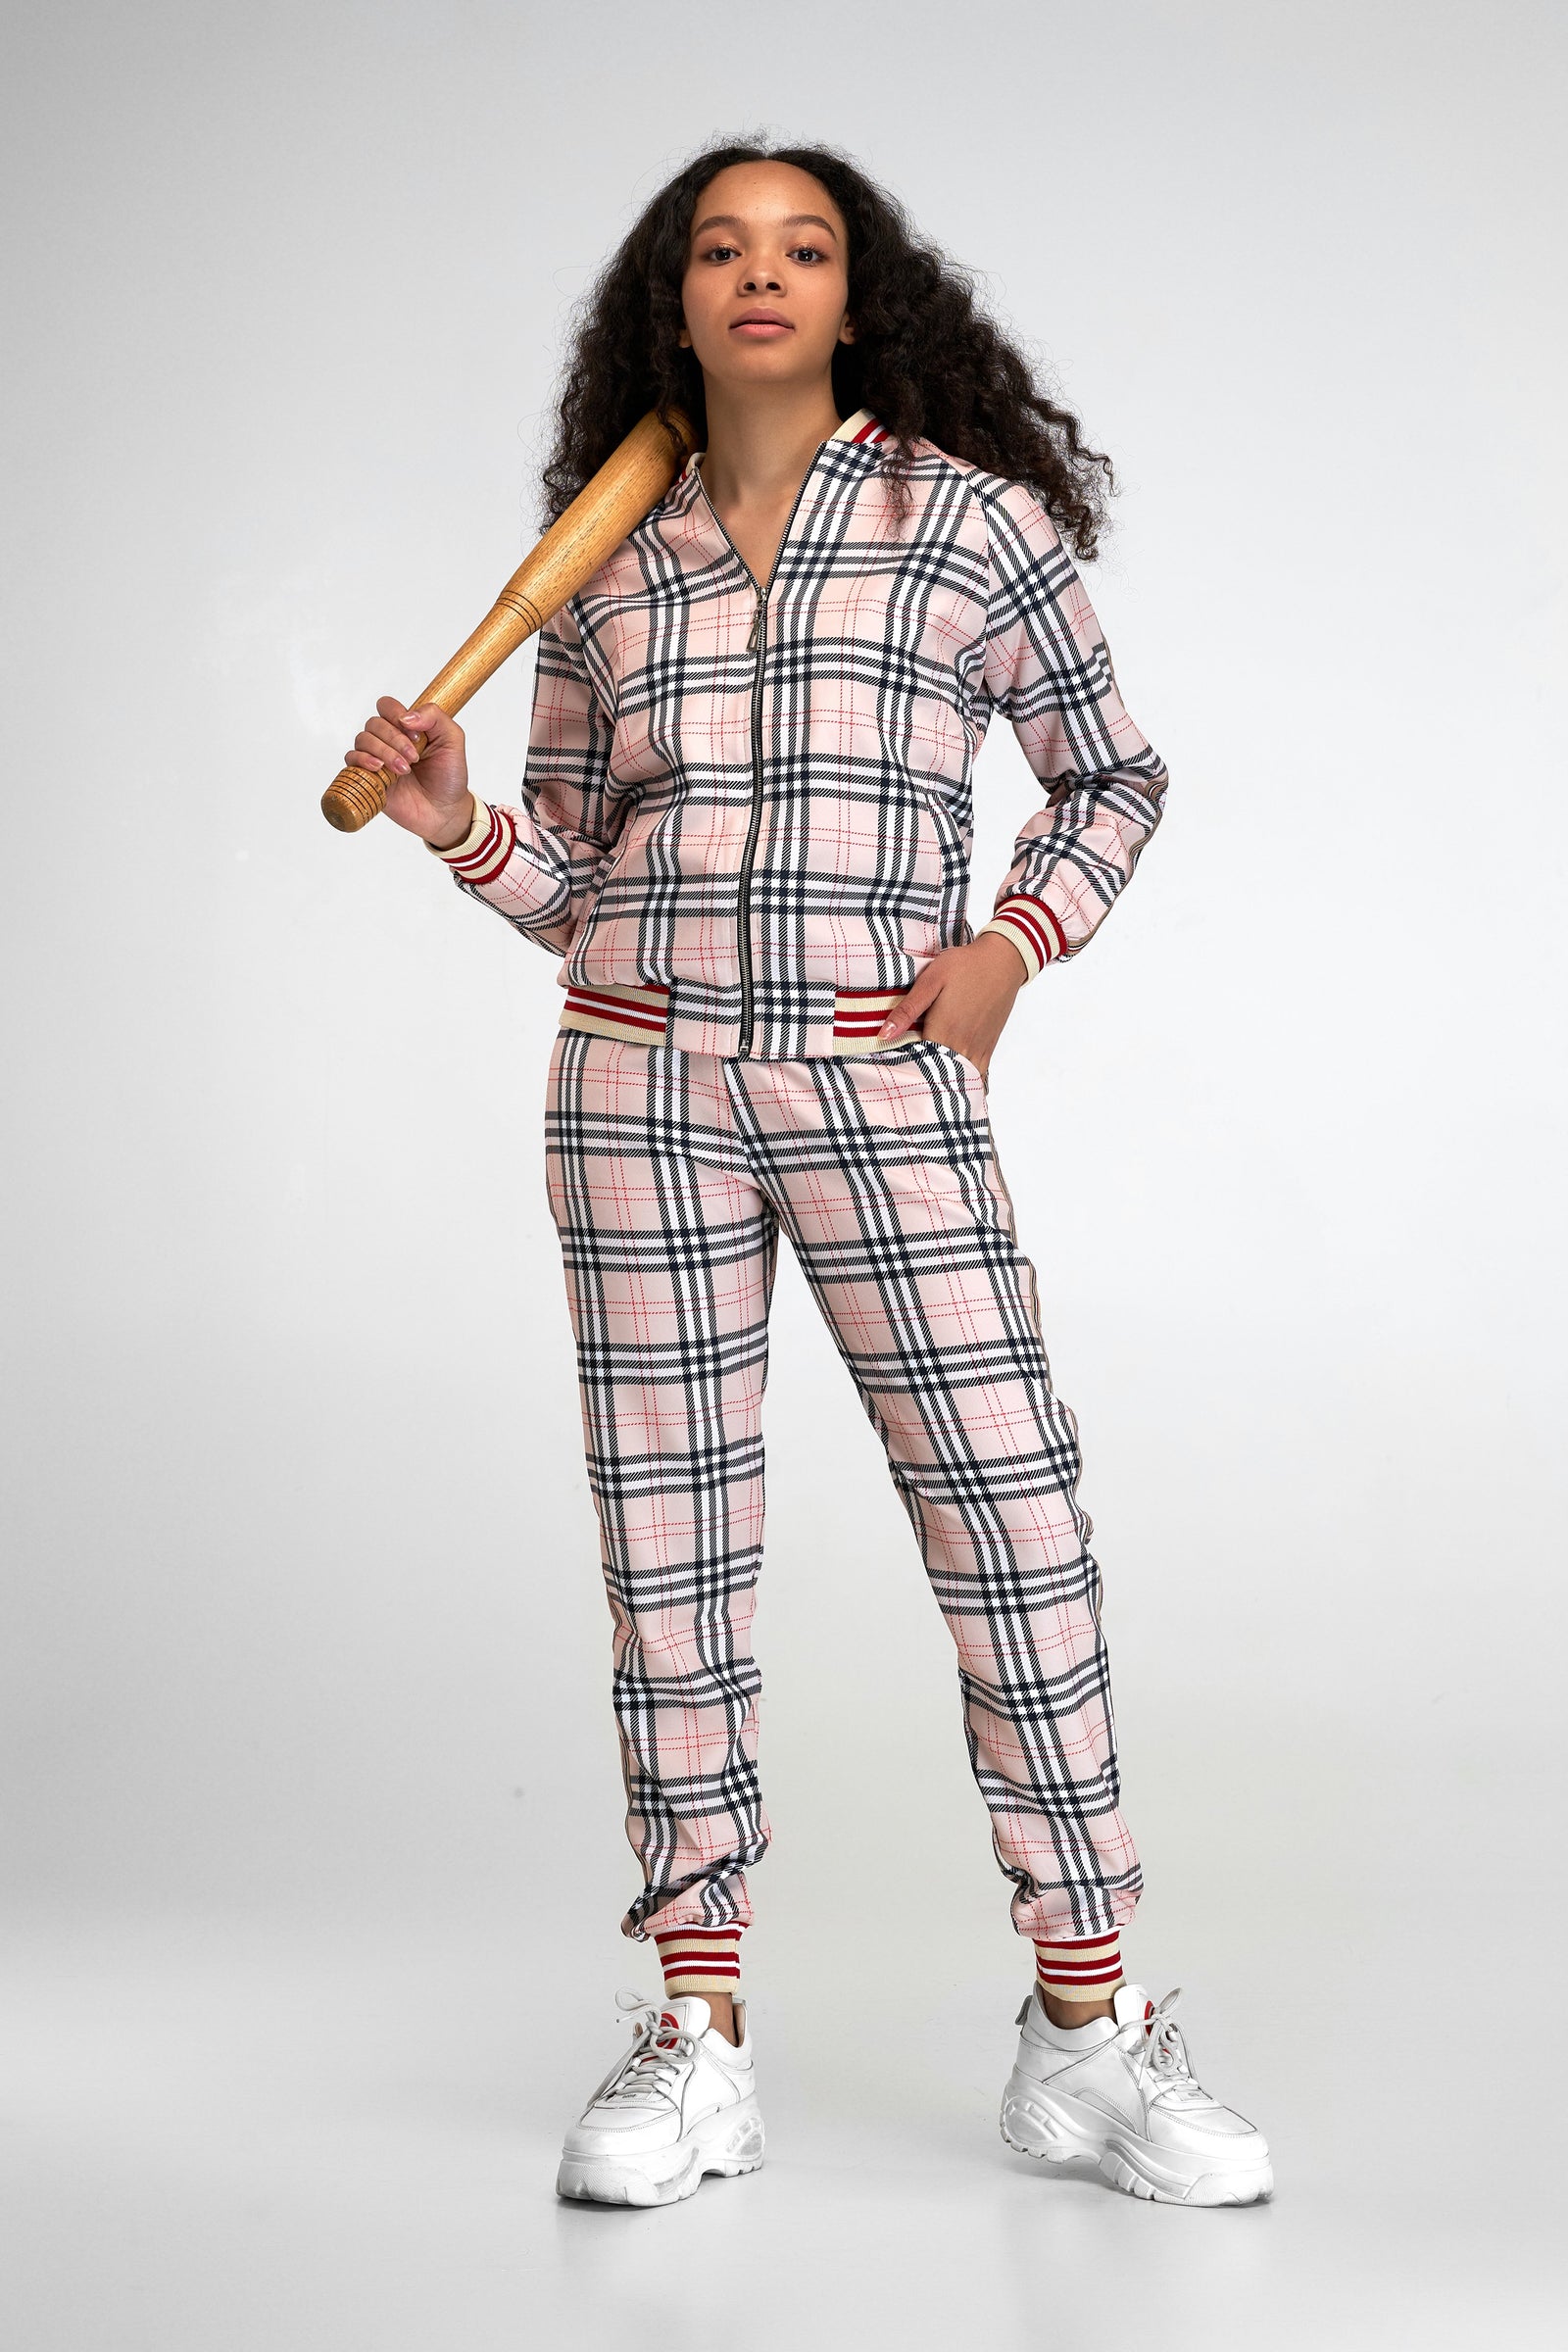 The Gentleman Tracksuits for Women - Plaid Women's Tracksuits